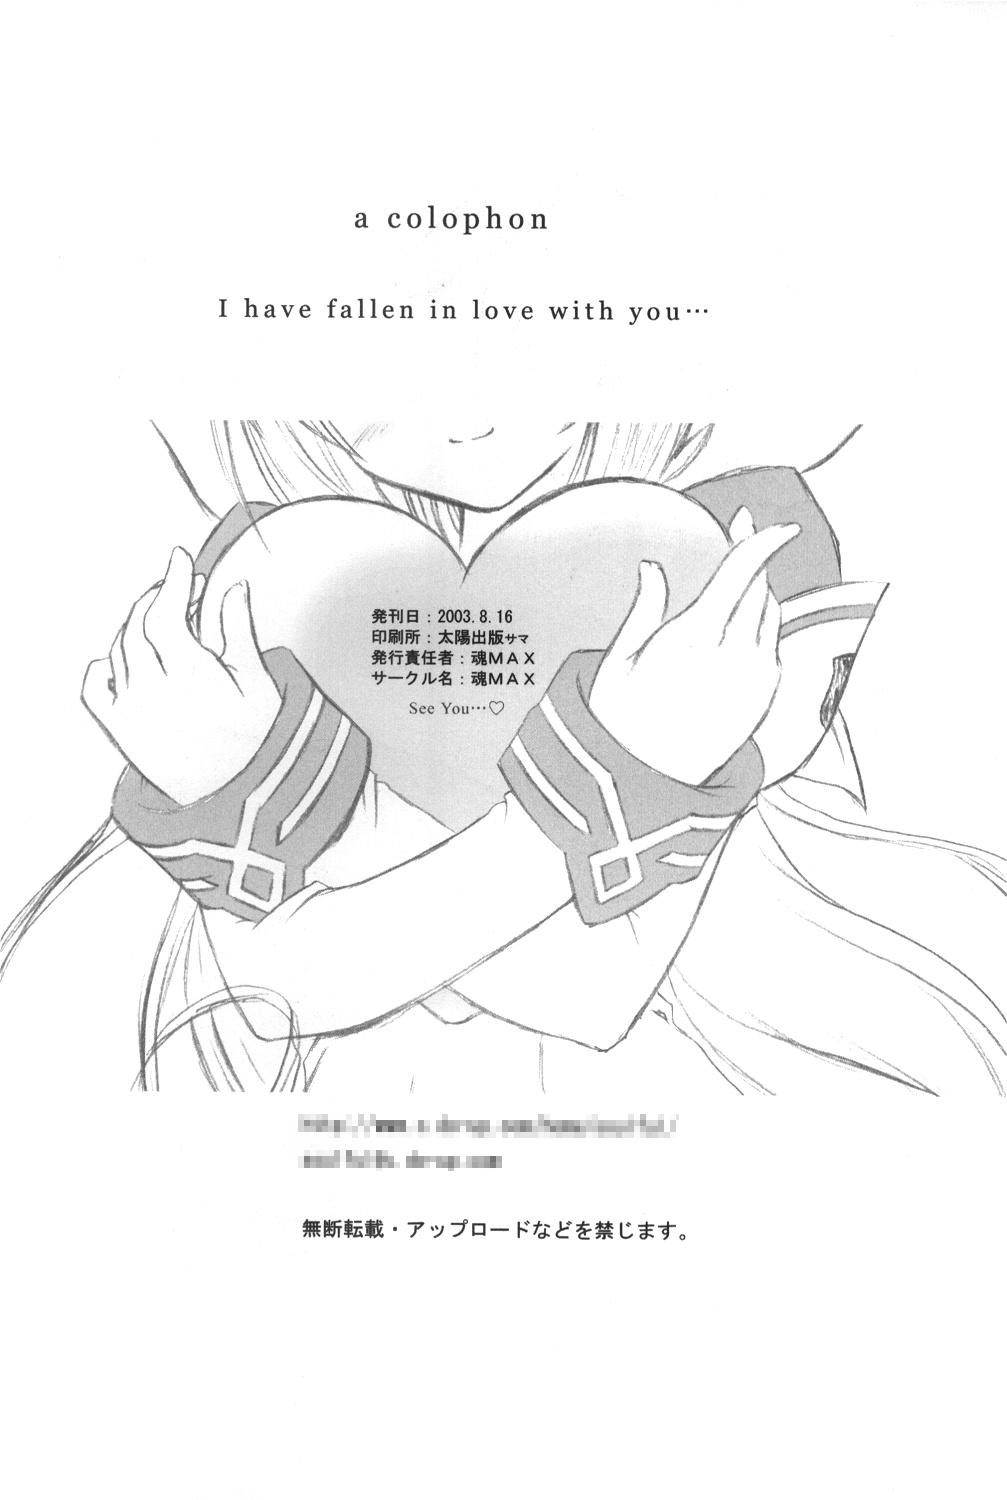 Hard I have fallen in love with you... - Muv-luv Lesbo - Page 25